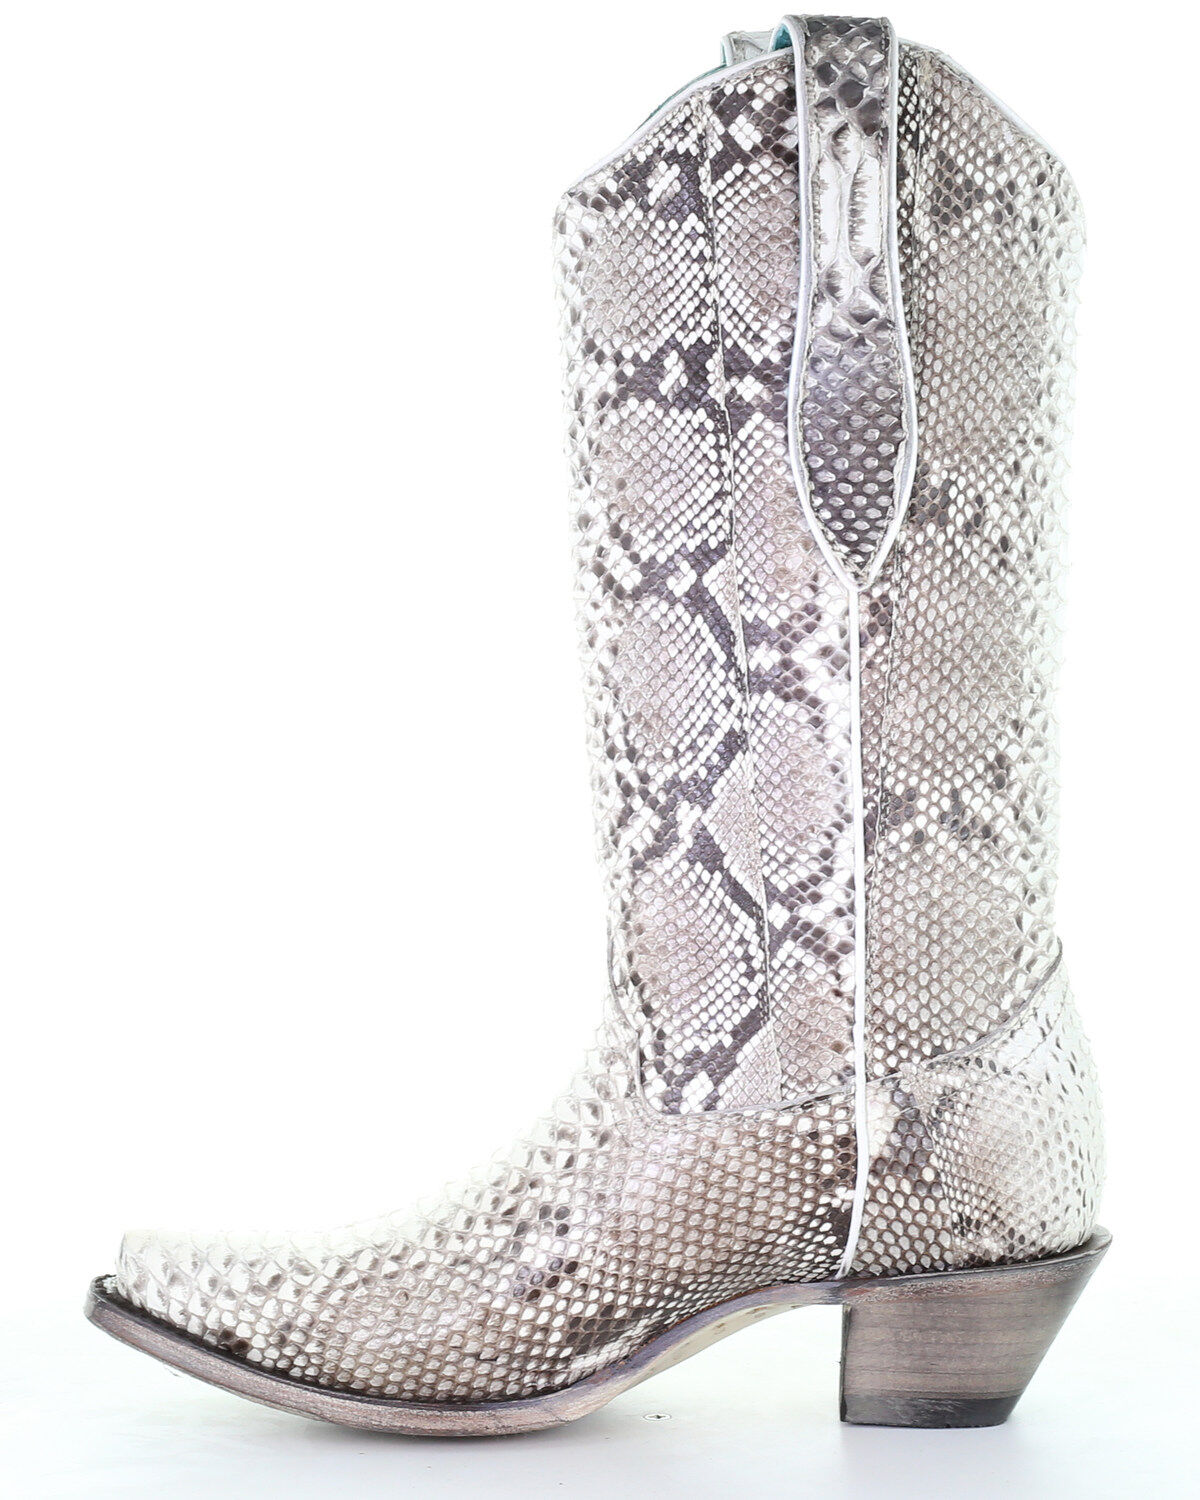 corral women's python boots